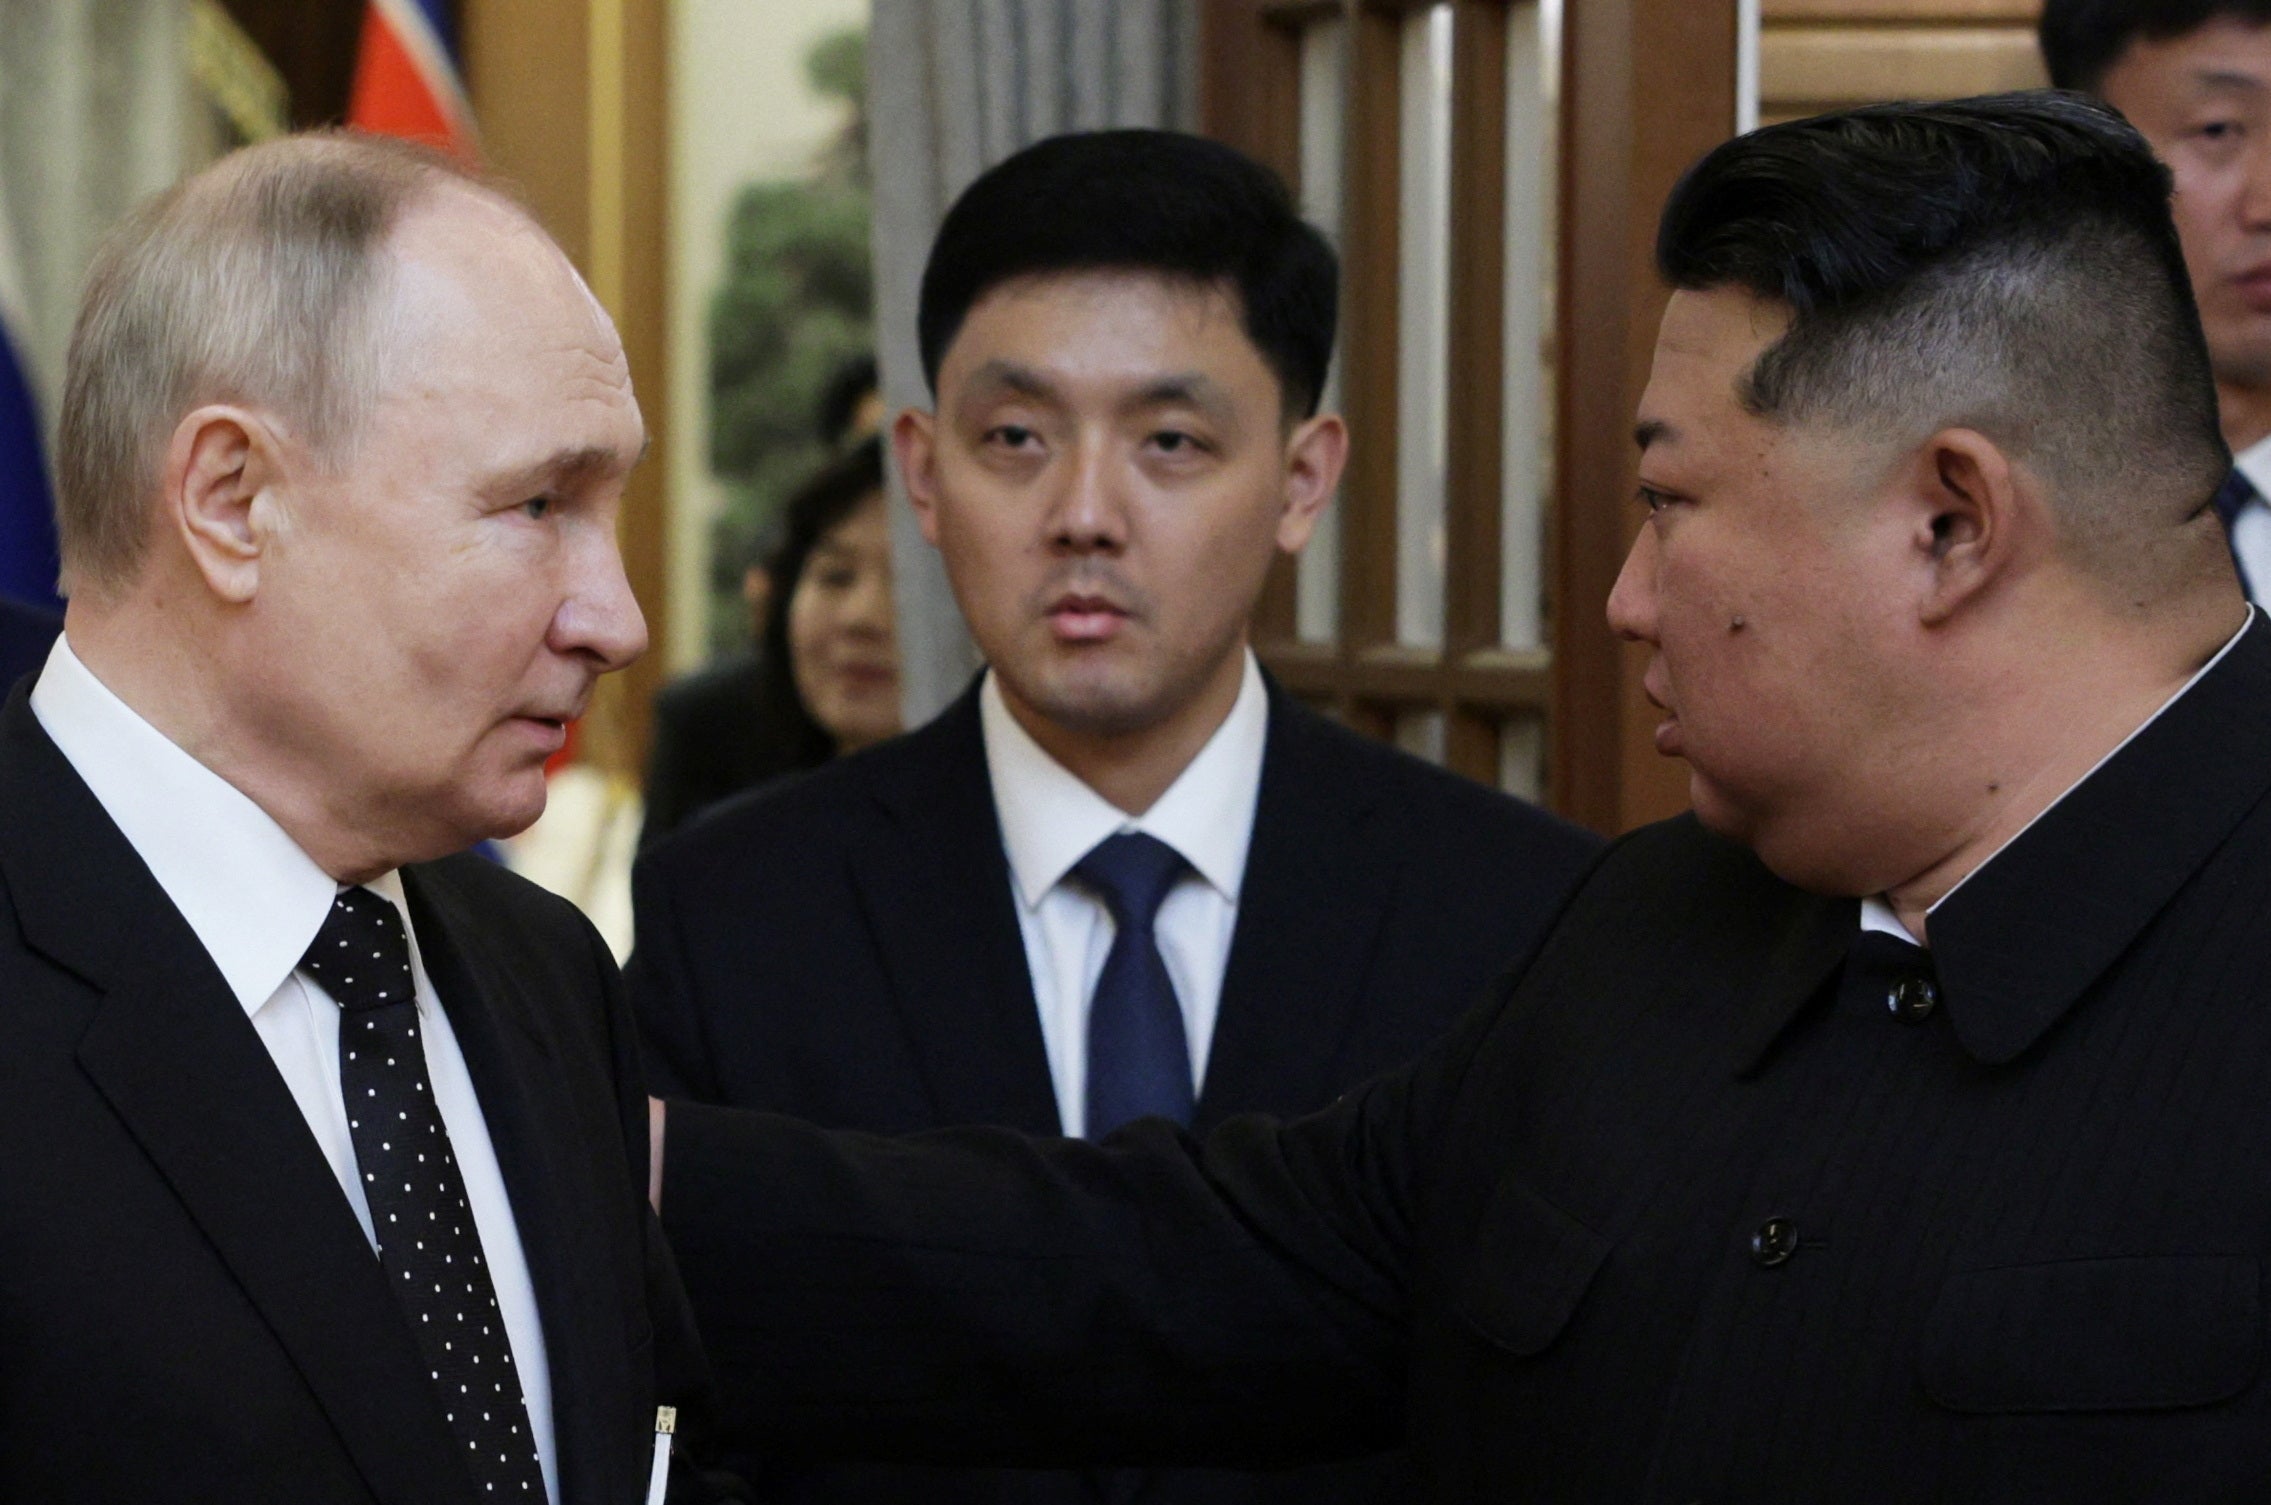 The remarks came as Vladimir Putin and North Korea's leader Kim Jong Un struck a new defence pact in Pyongyang